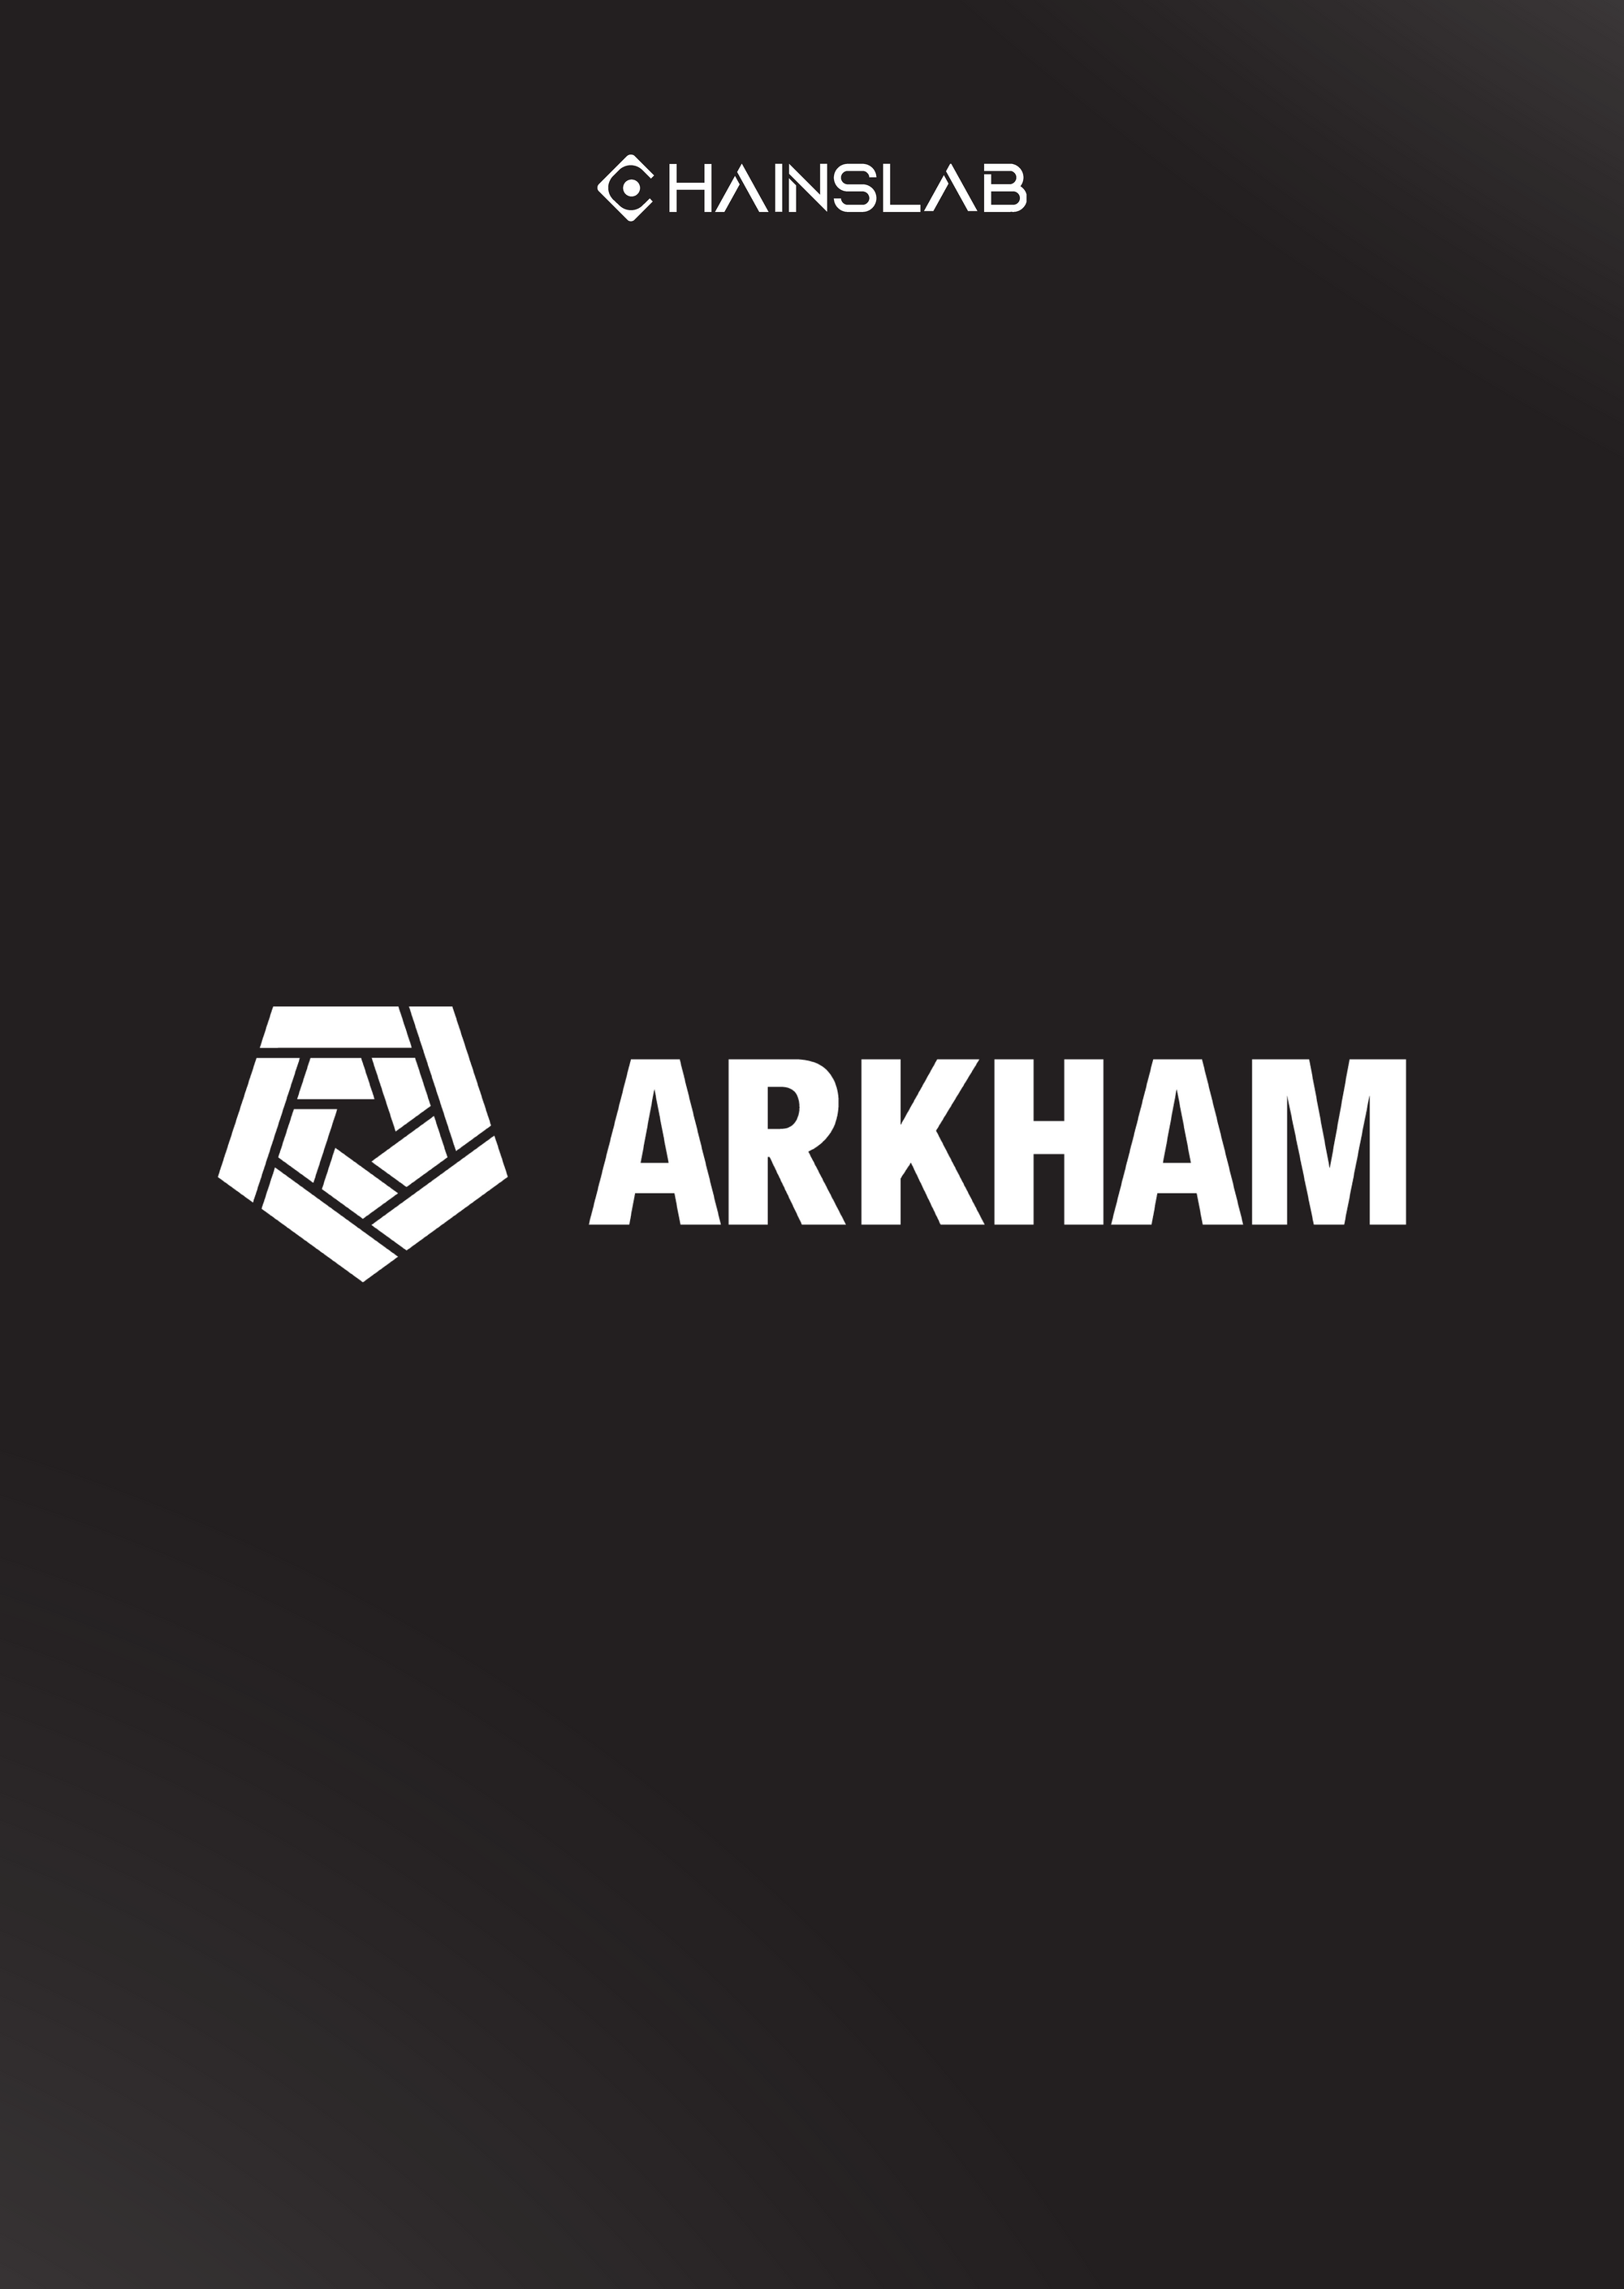 What is Arkham? New Playground for On-chain Detectives